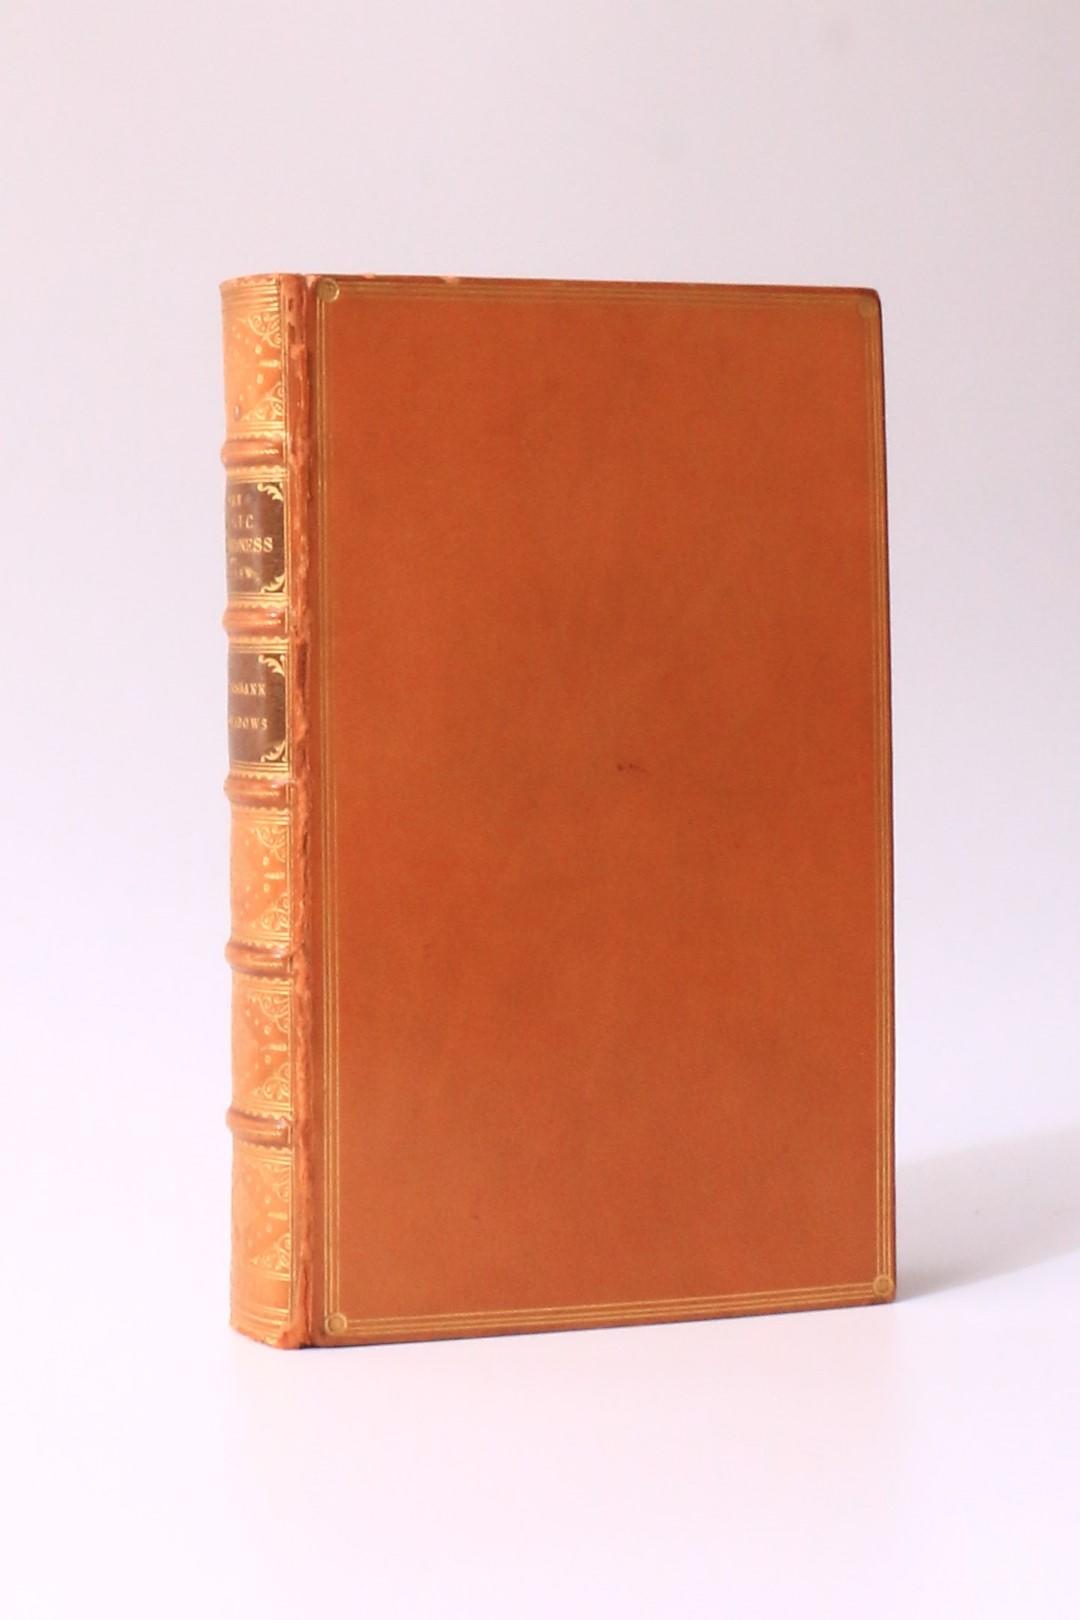 The Brothers Mayhew - The Magic of Kindness; or, the Wondrous Story of the Good Huan - Darton & Co., n.d. [1849], First Edition.